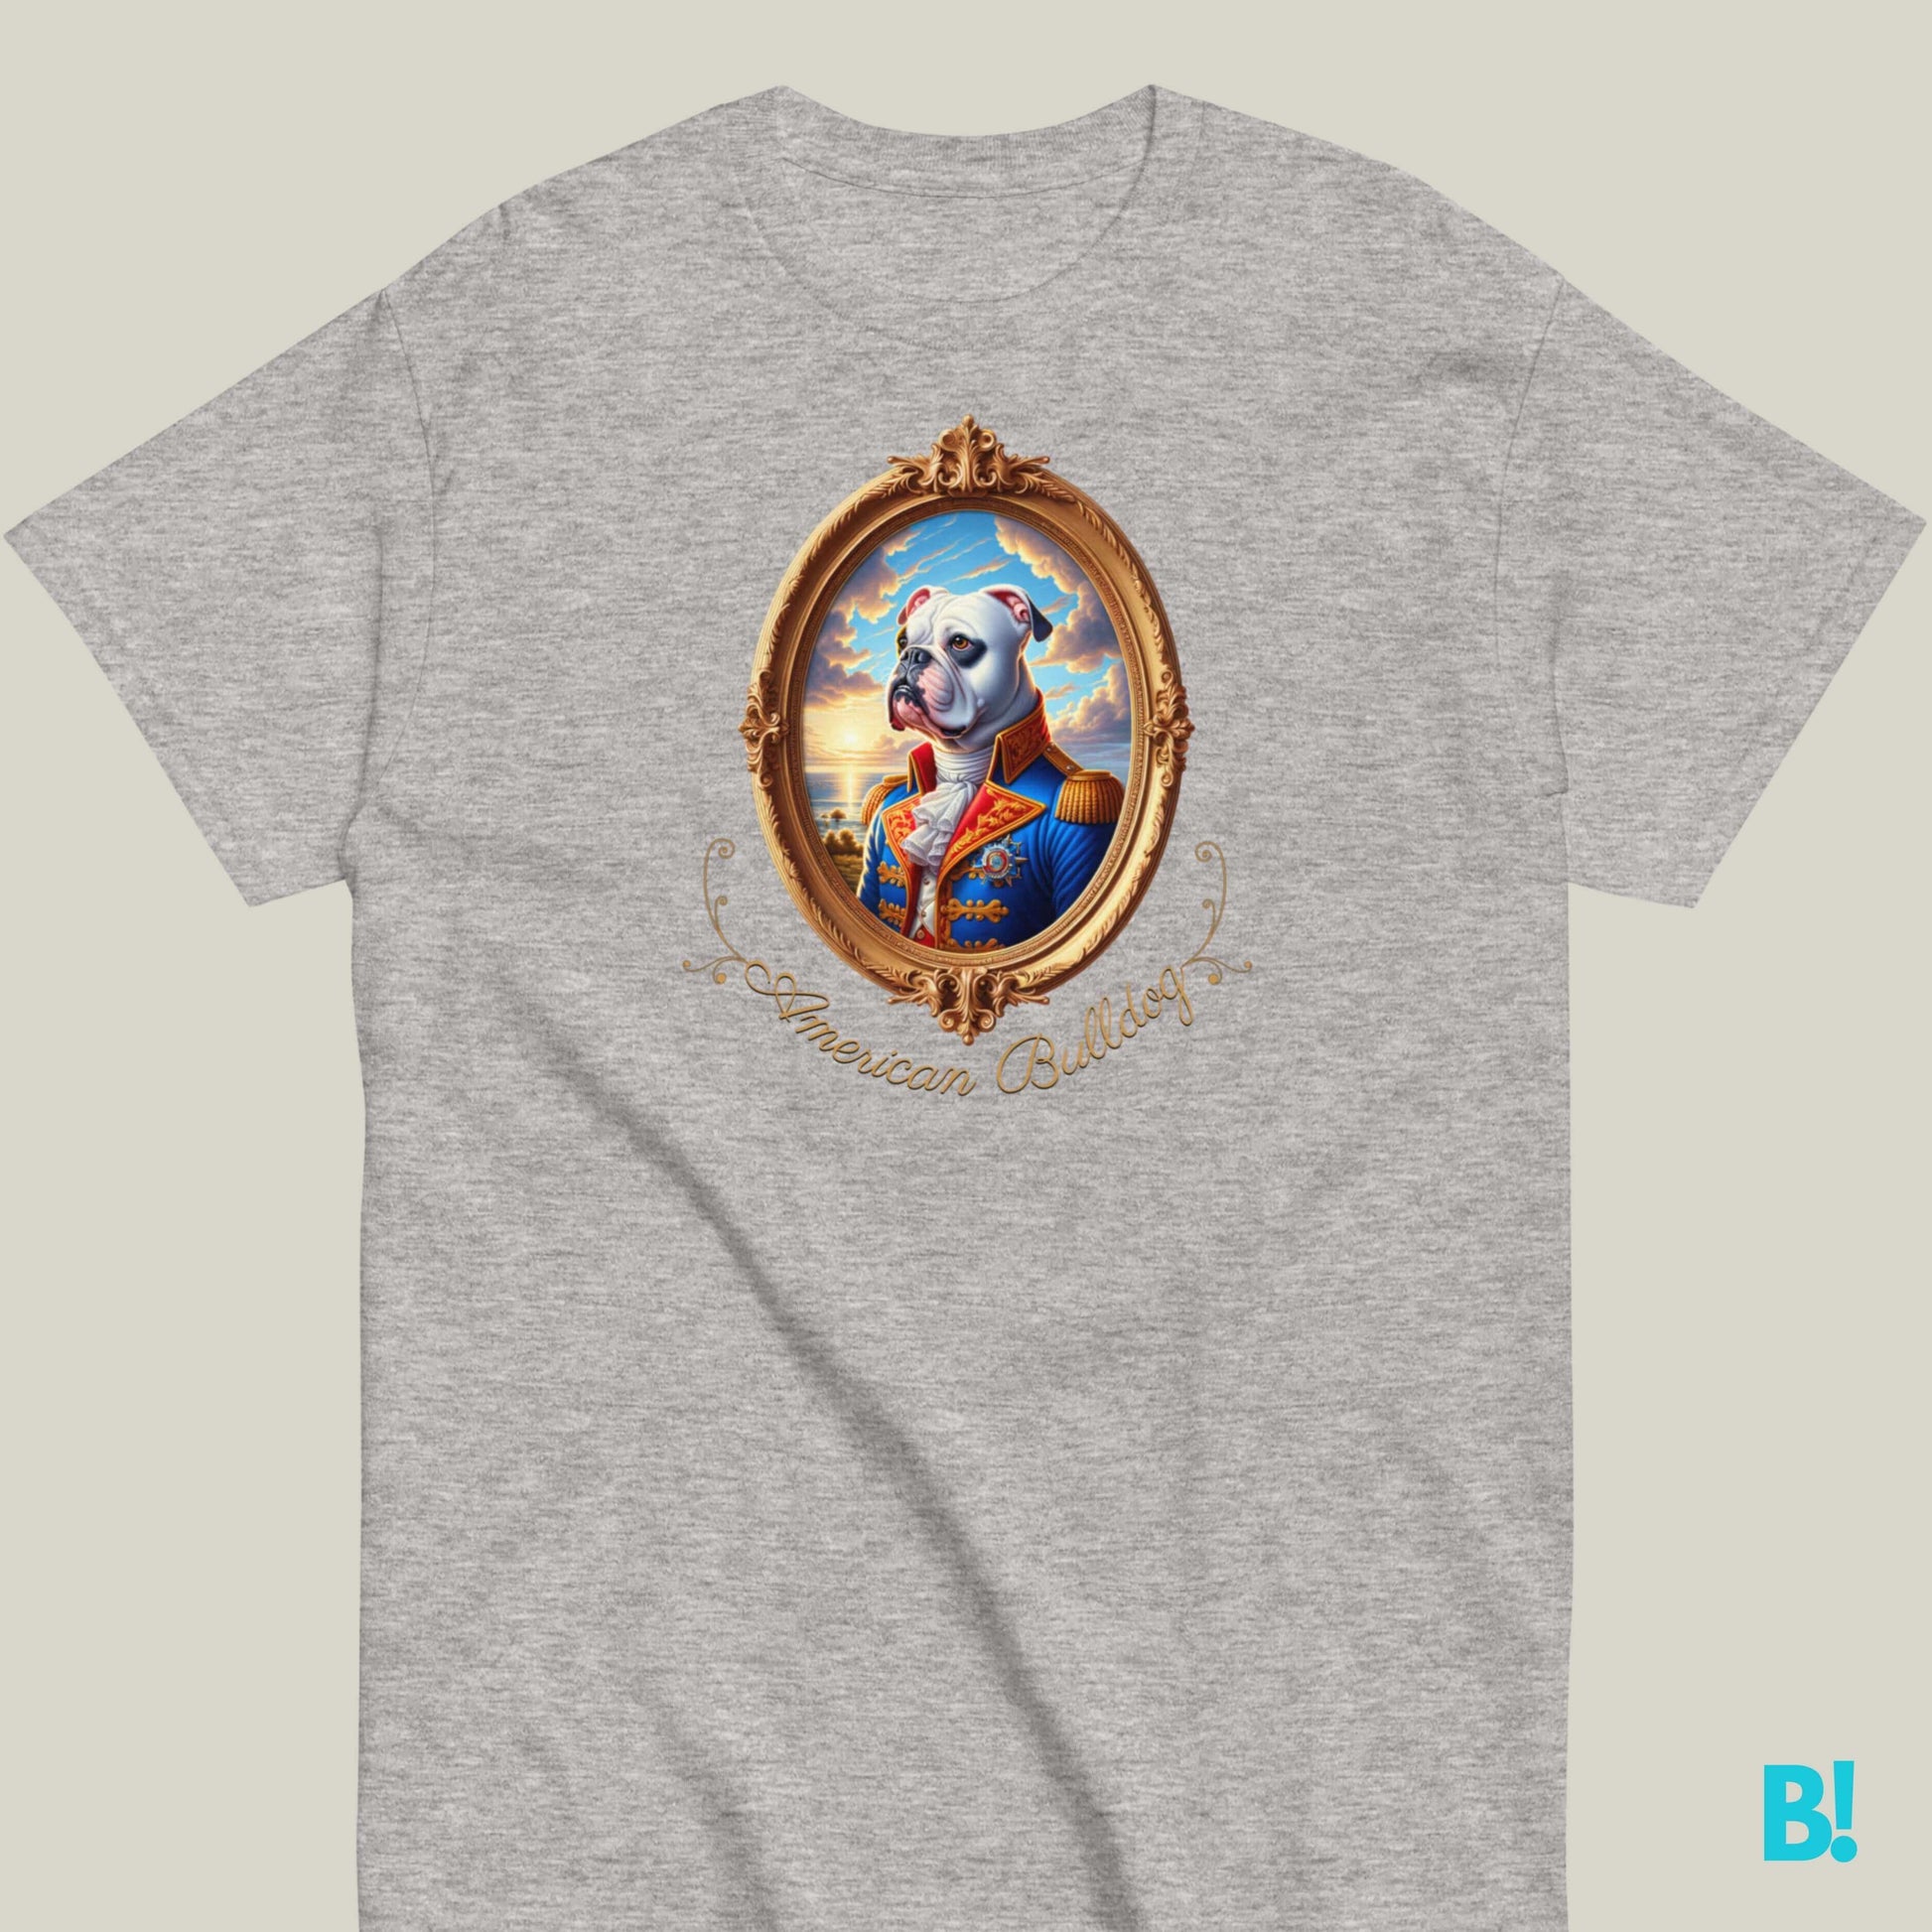 American Bulldog Tee: Embrace Strength & Style Sport the American Bulldog portrait tee for a touch of boldness! Premium 100% cotton, 7 colors, unisex sizes S-XXXL. Perfect fit for Bulldog lovers. €29.50 B!NKY Comfywear